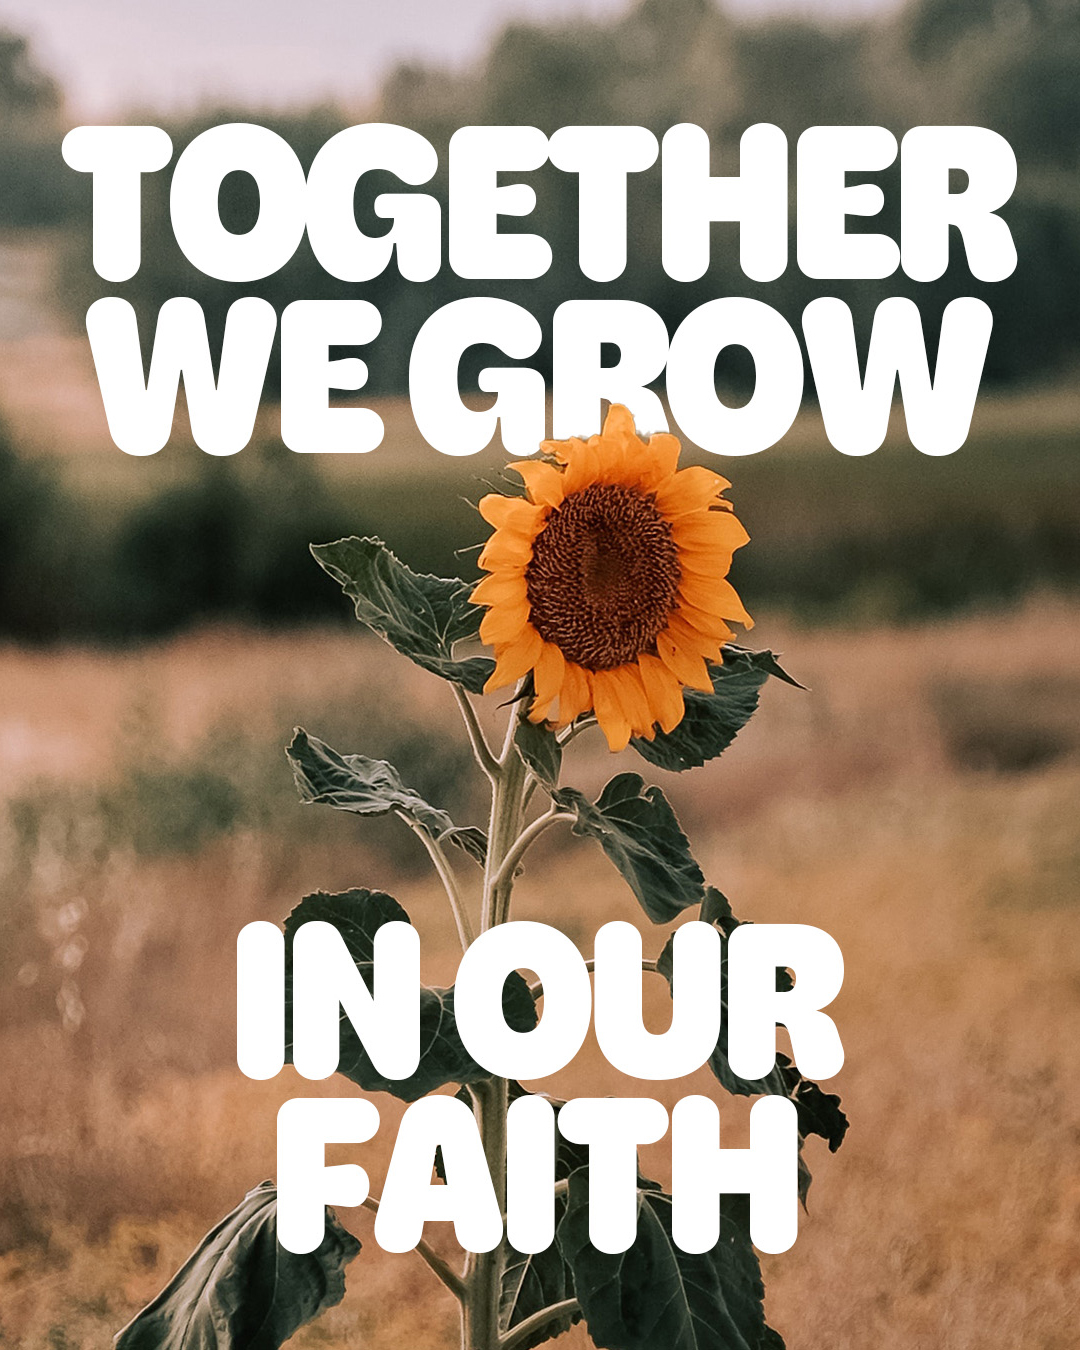 Together we grow in our faith